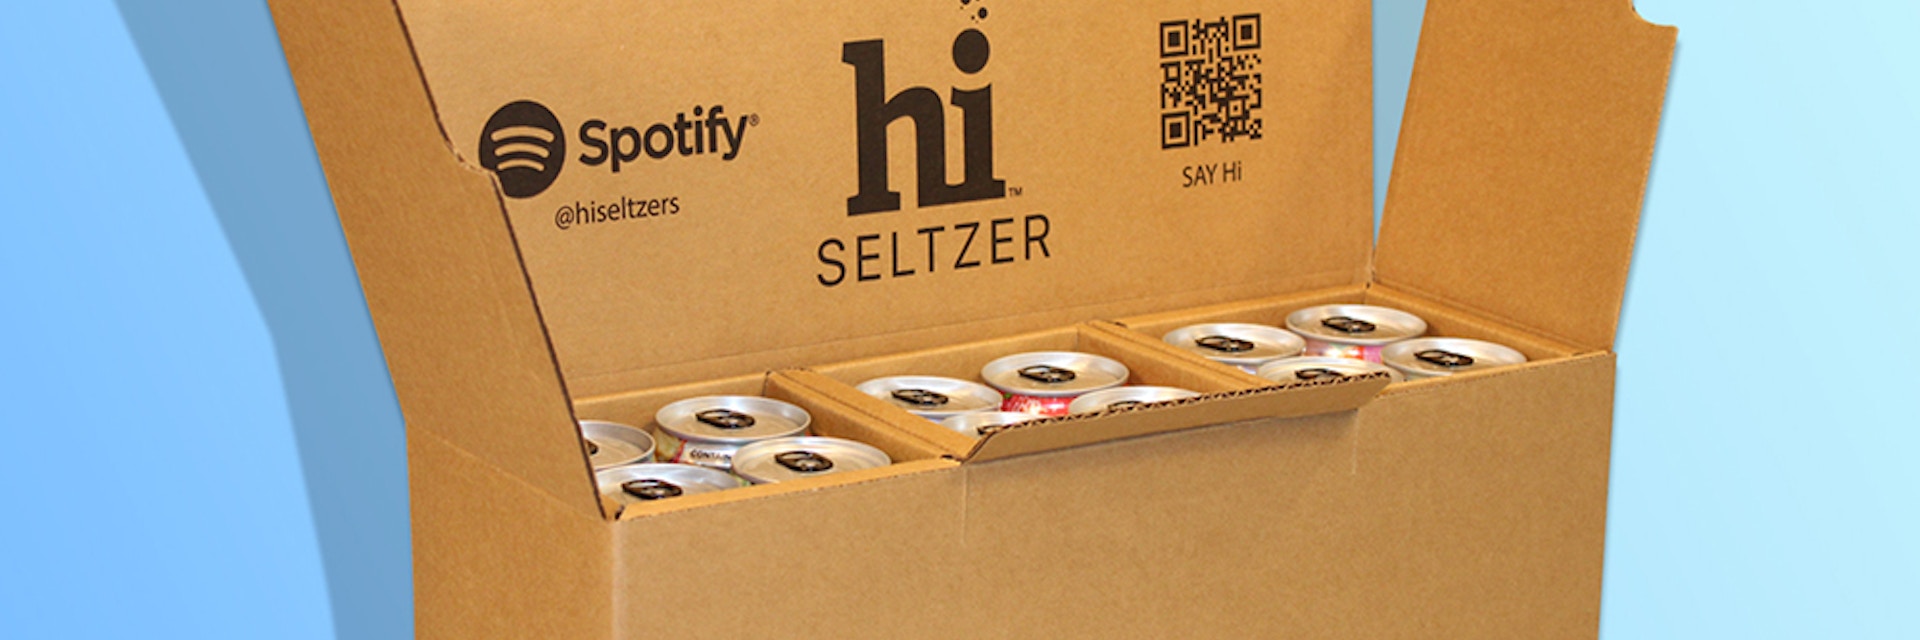 seltzer shipping boxes for cbd infused cans